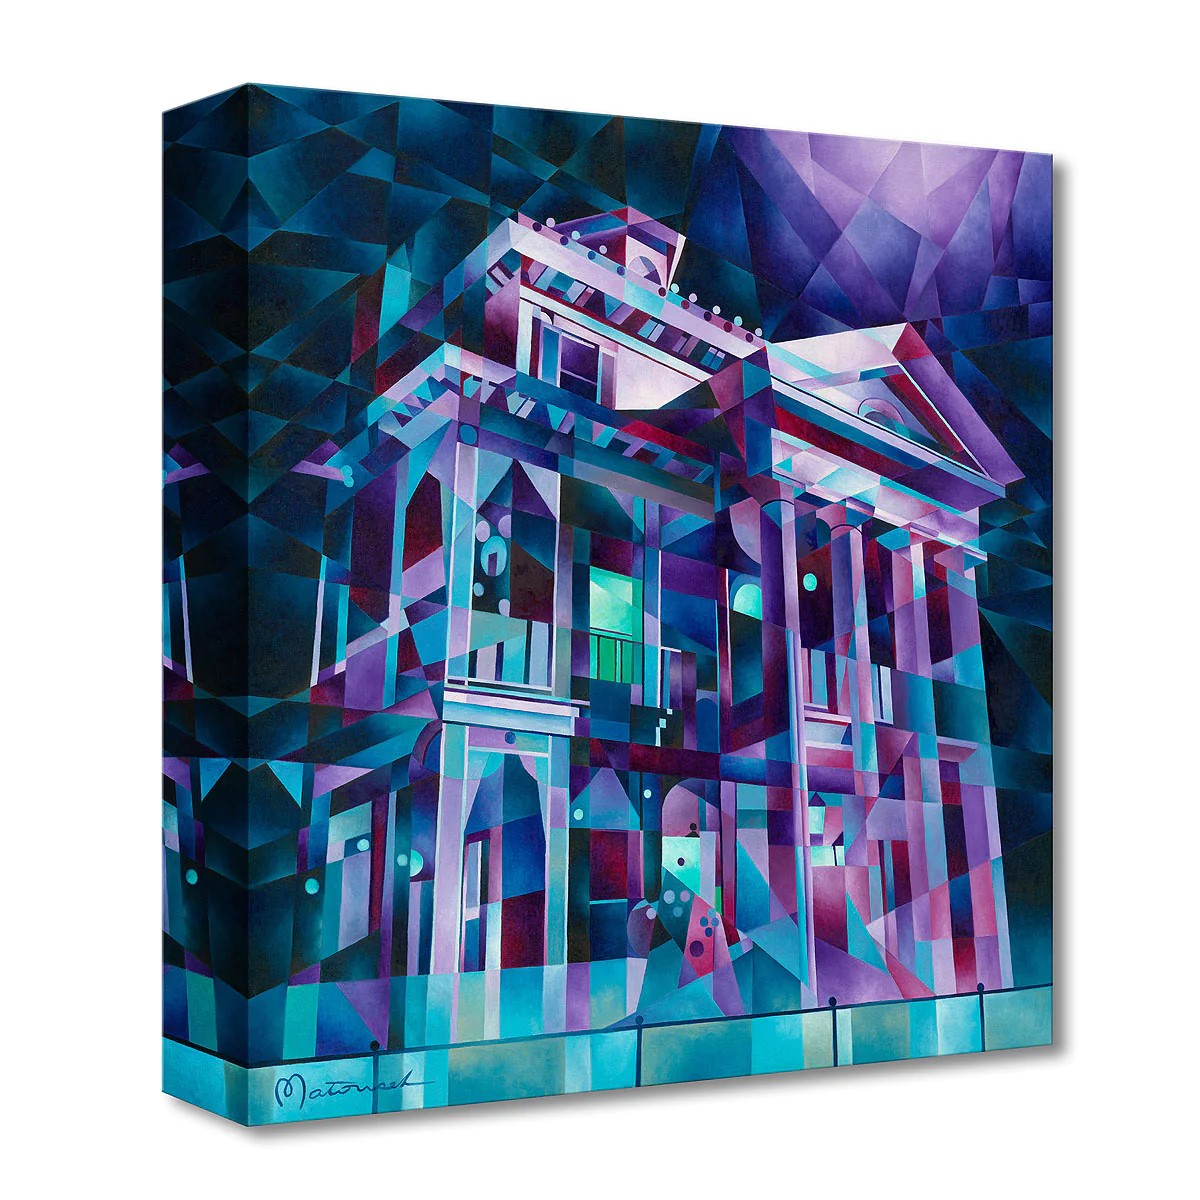 The Haunted Mansion by Tom Matousek inspired by Disney's The Haunted Mansion